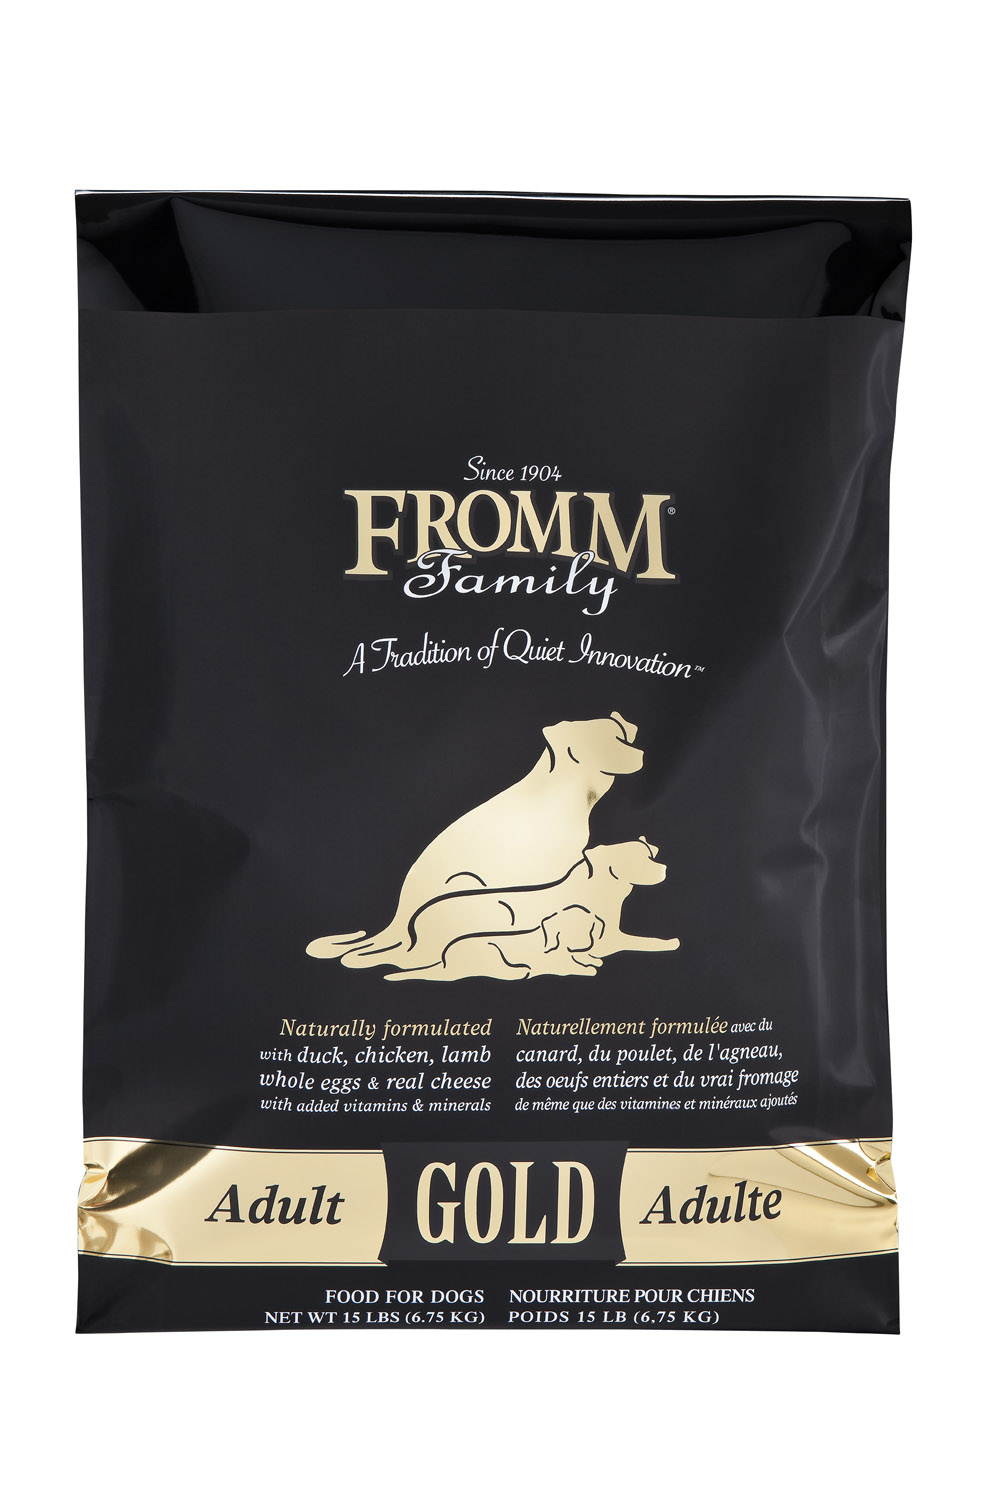 Fromm Family Adult Gold Food for Dogs, 15 lbs